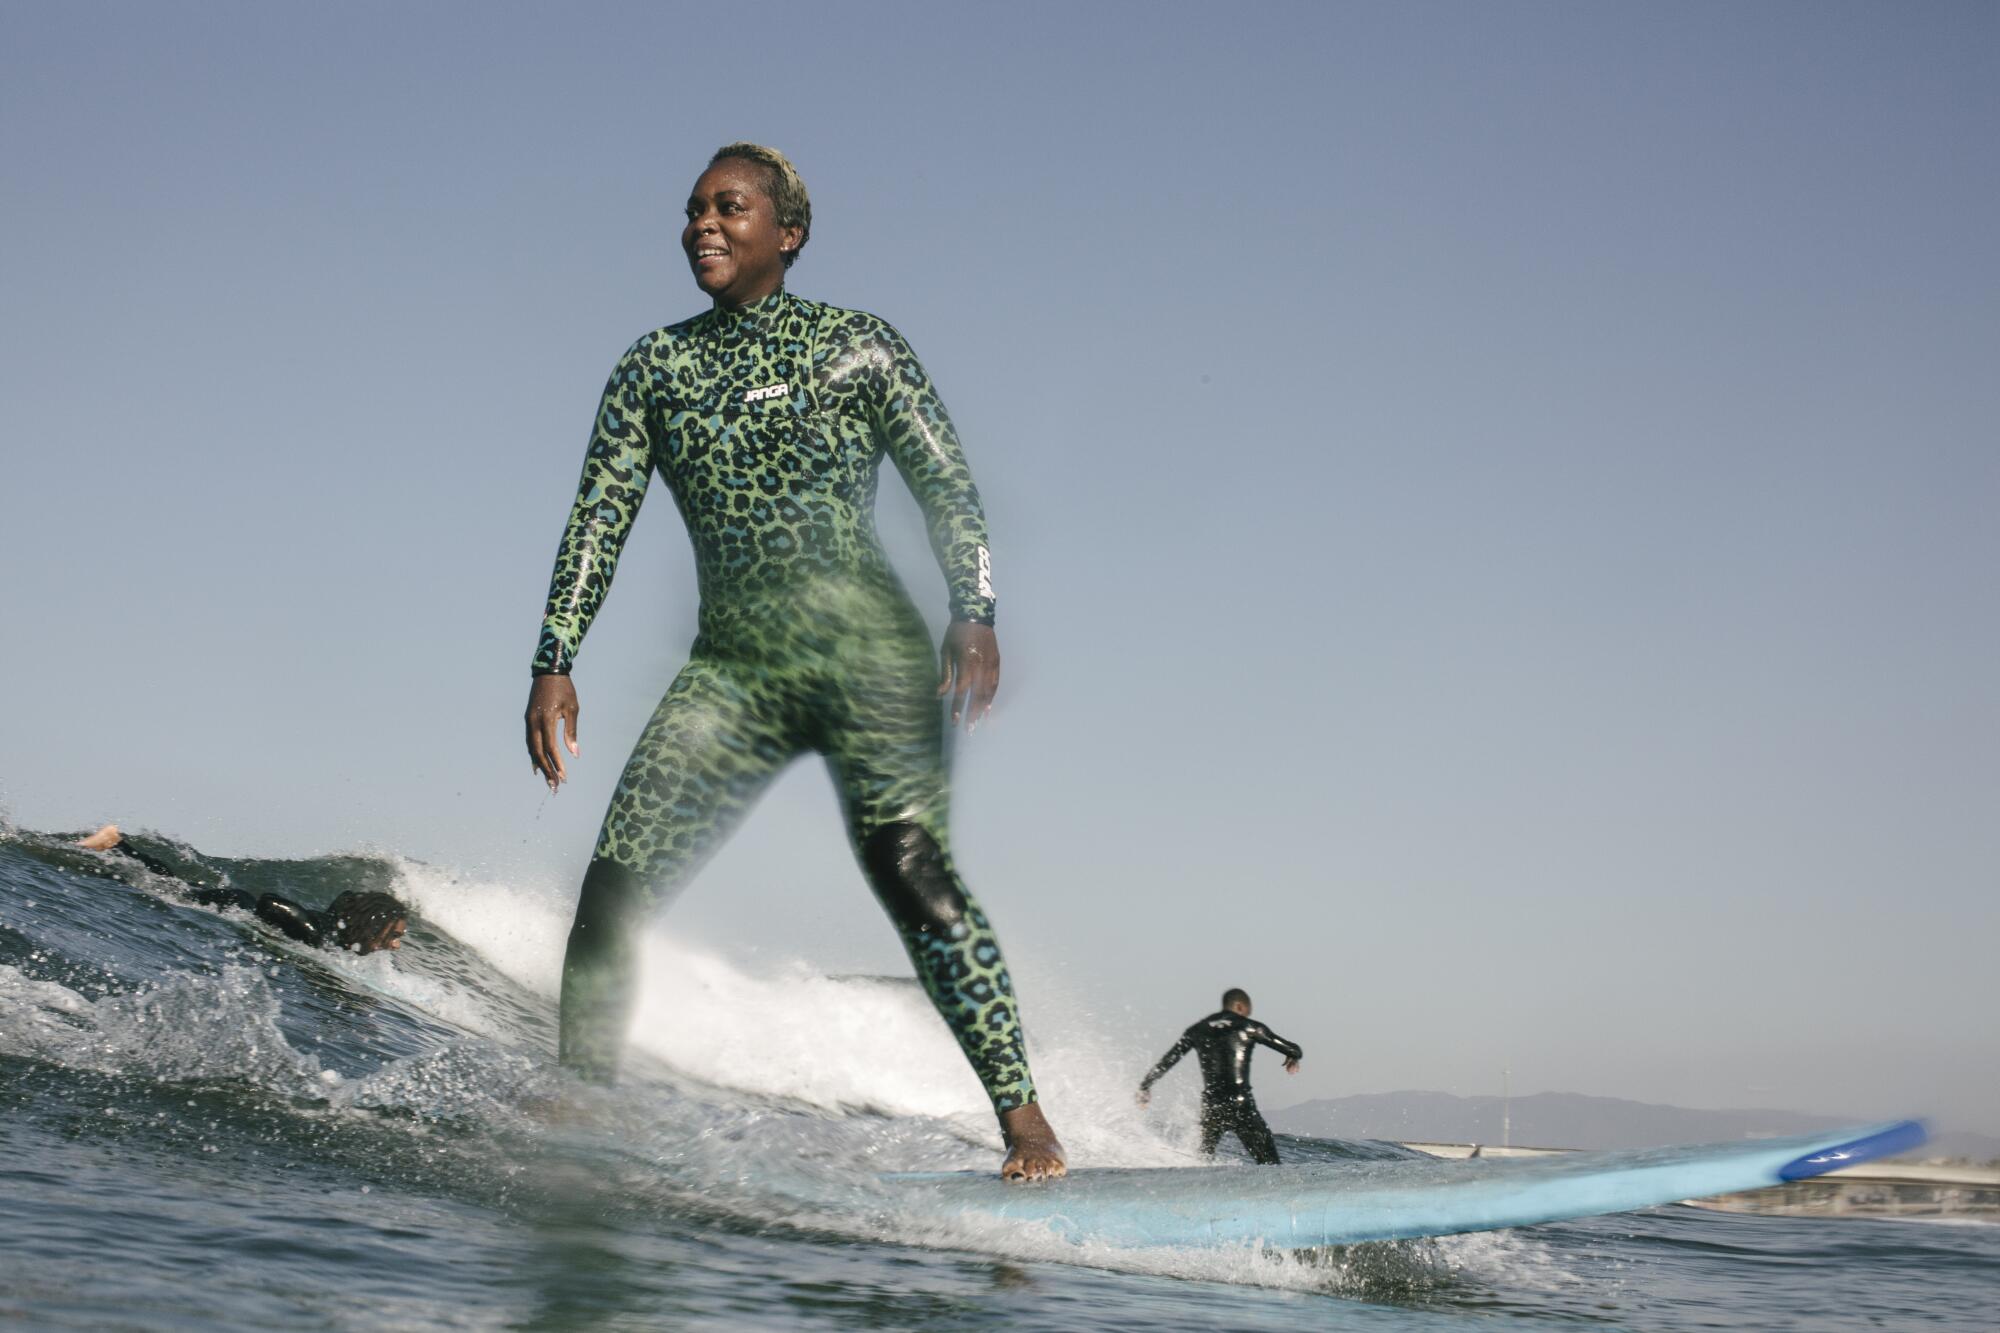 Marina Del Rey, CA - Saturday, March 13 Jameelah Booker paddles for a wave during a morning surf session.